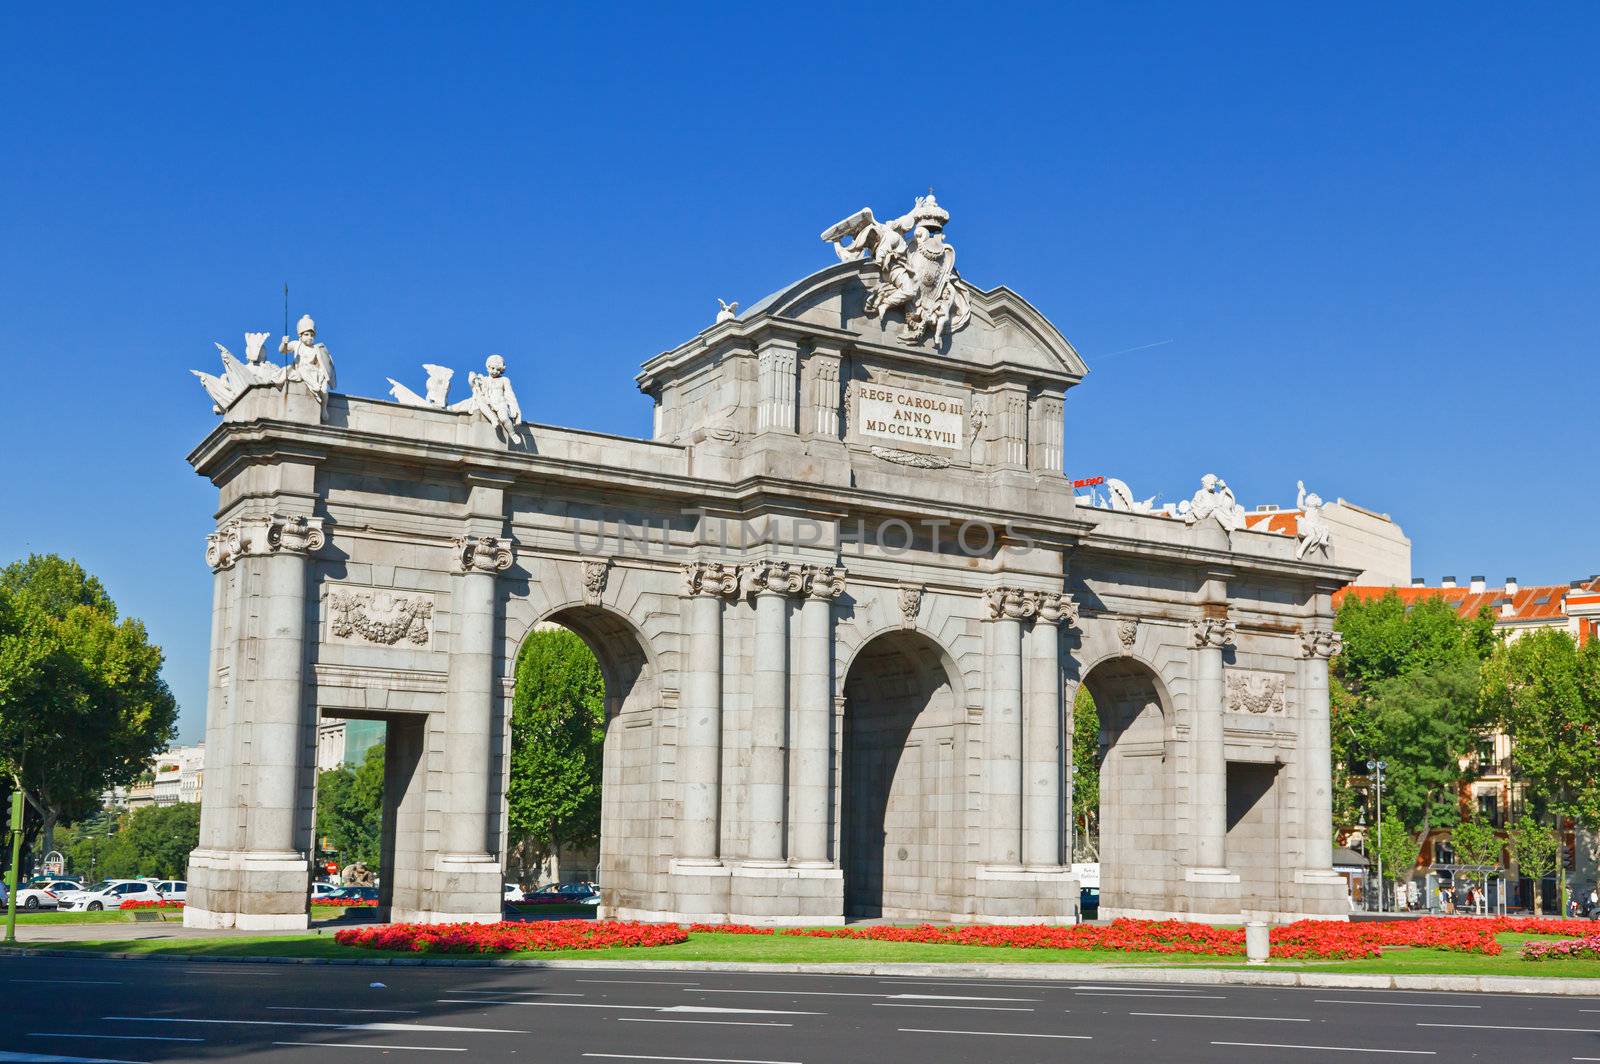 The Puerta de Alcala in Madrid by gary718